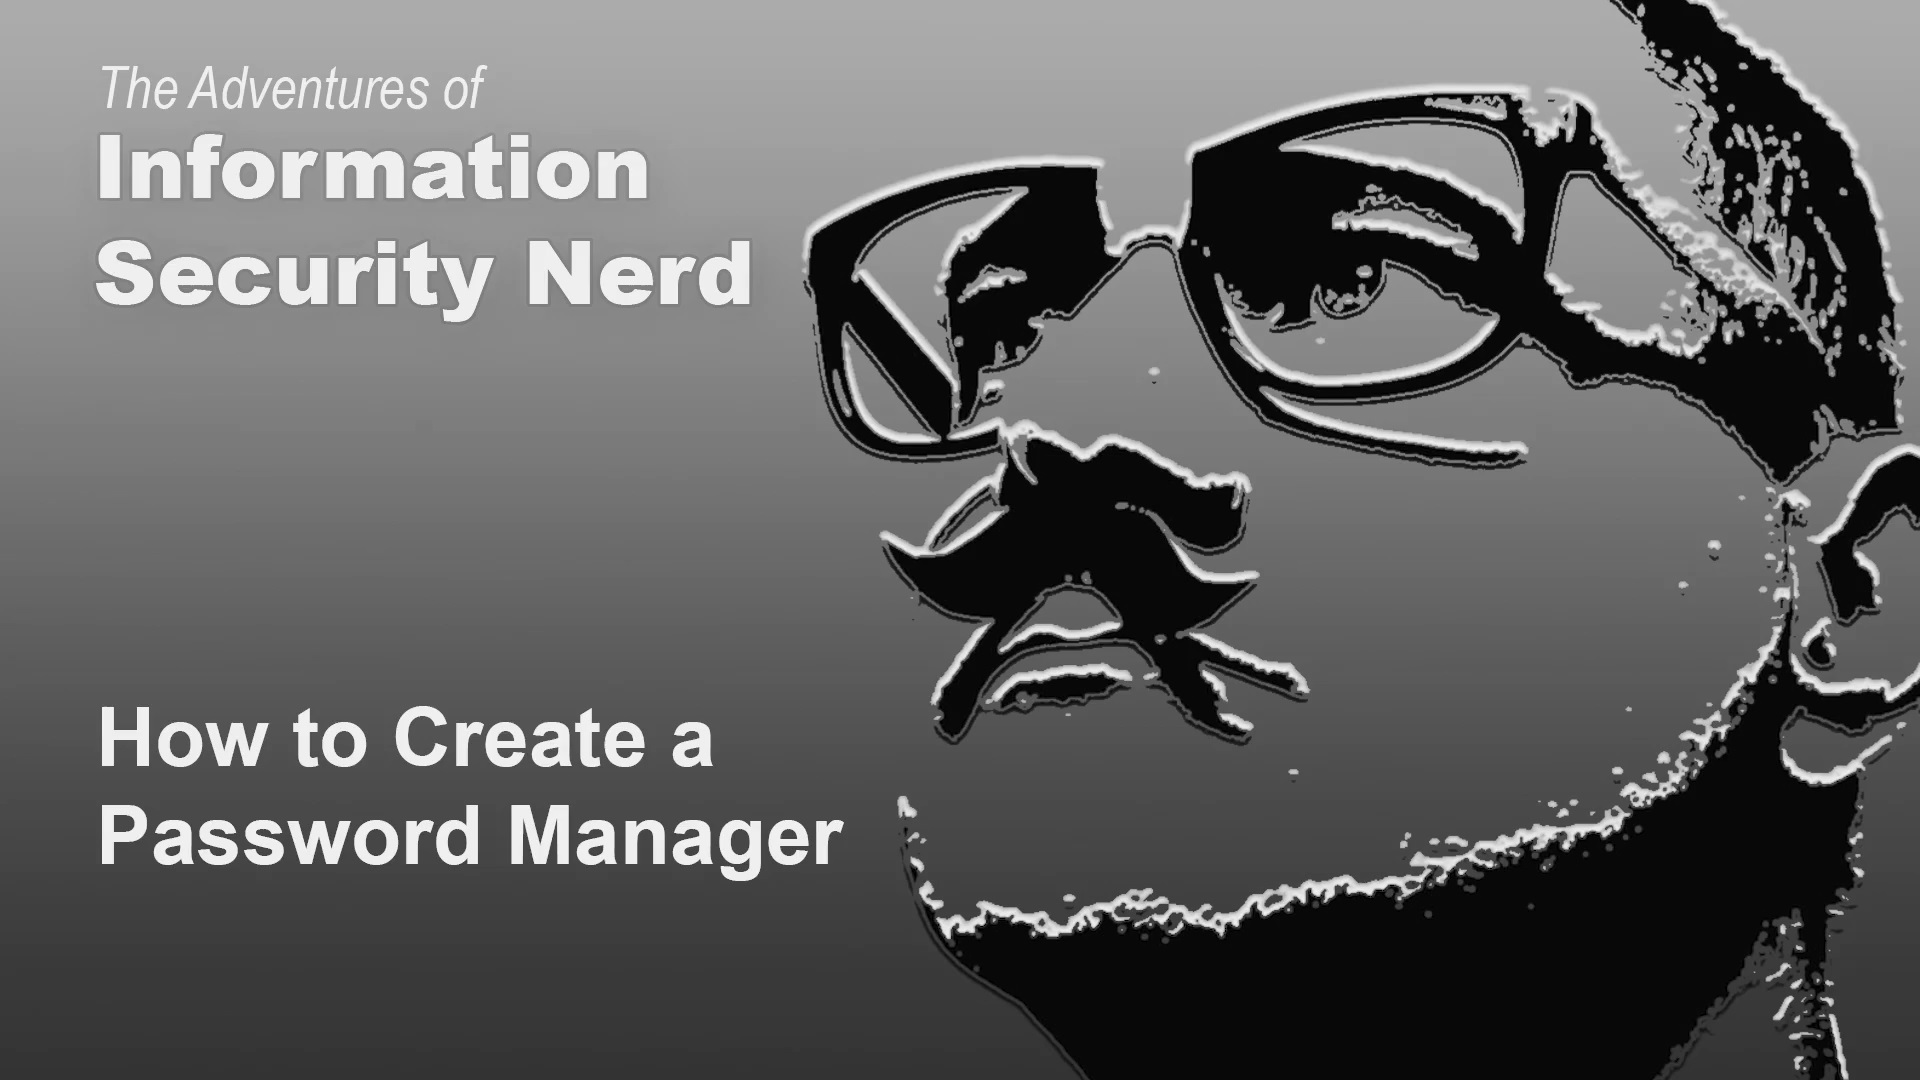 the adventures of information security nerd - how to create a password manager